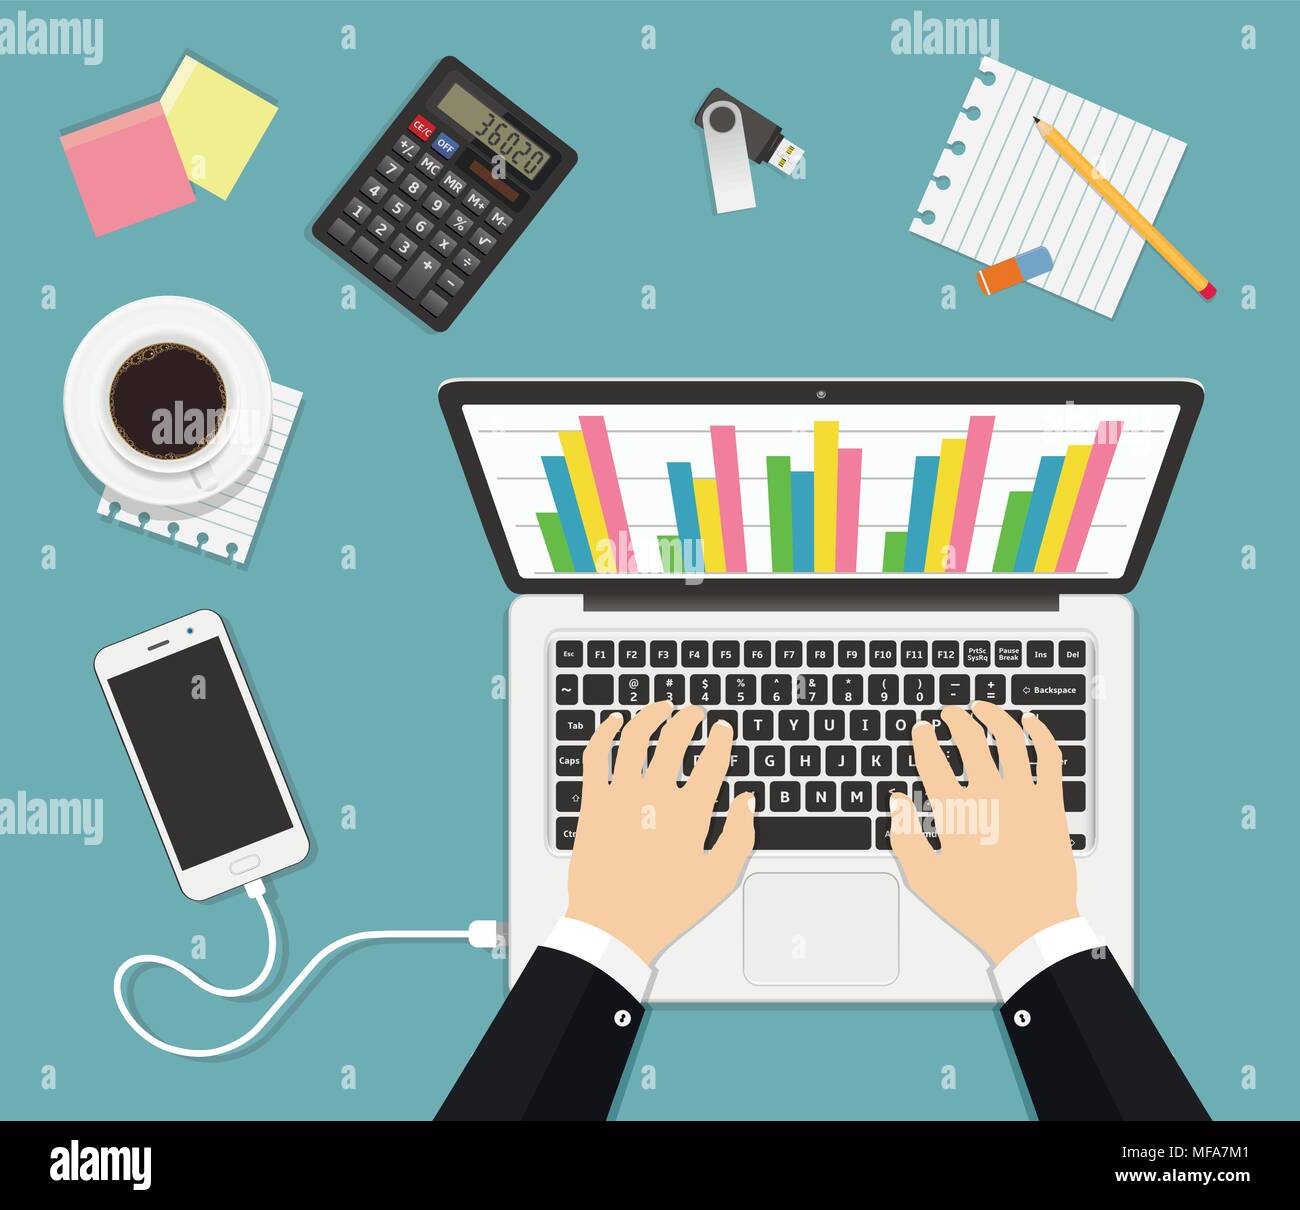 Businessman working on laptop analyzing graph statistic. Flat design concept. Vector illustration. Stock Vector